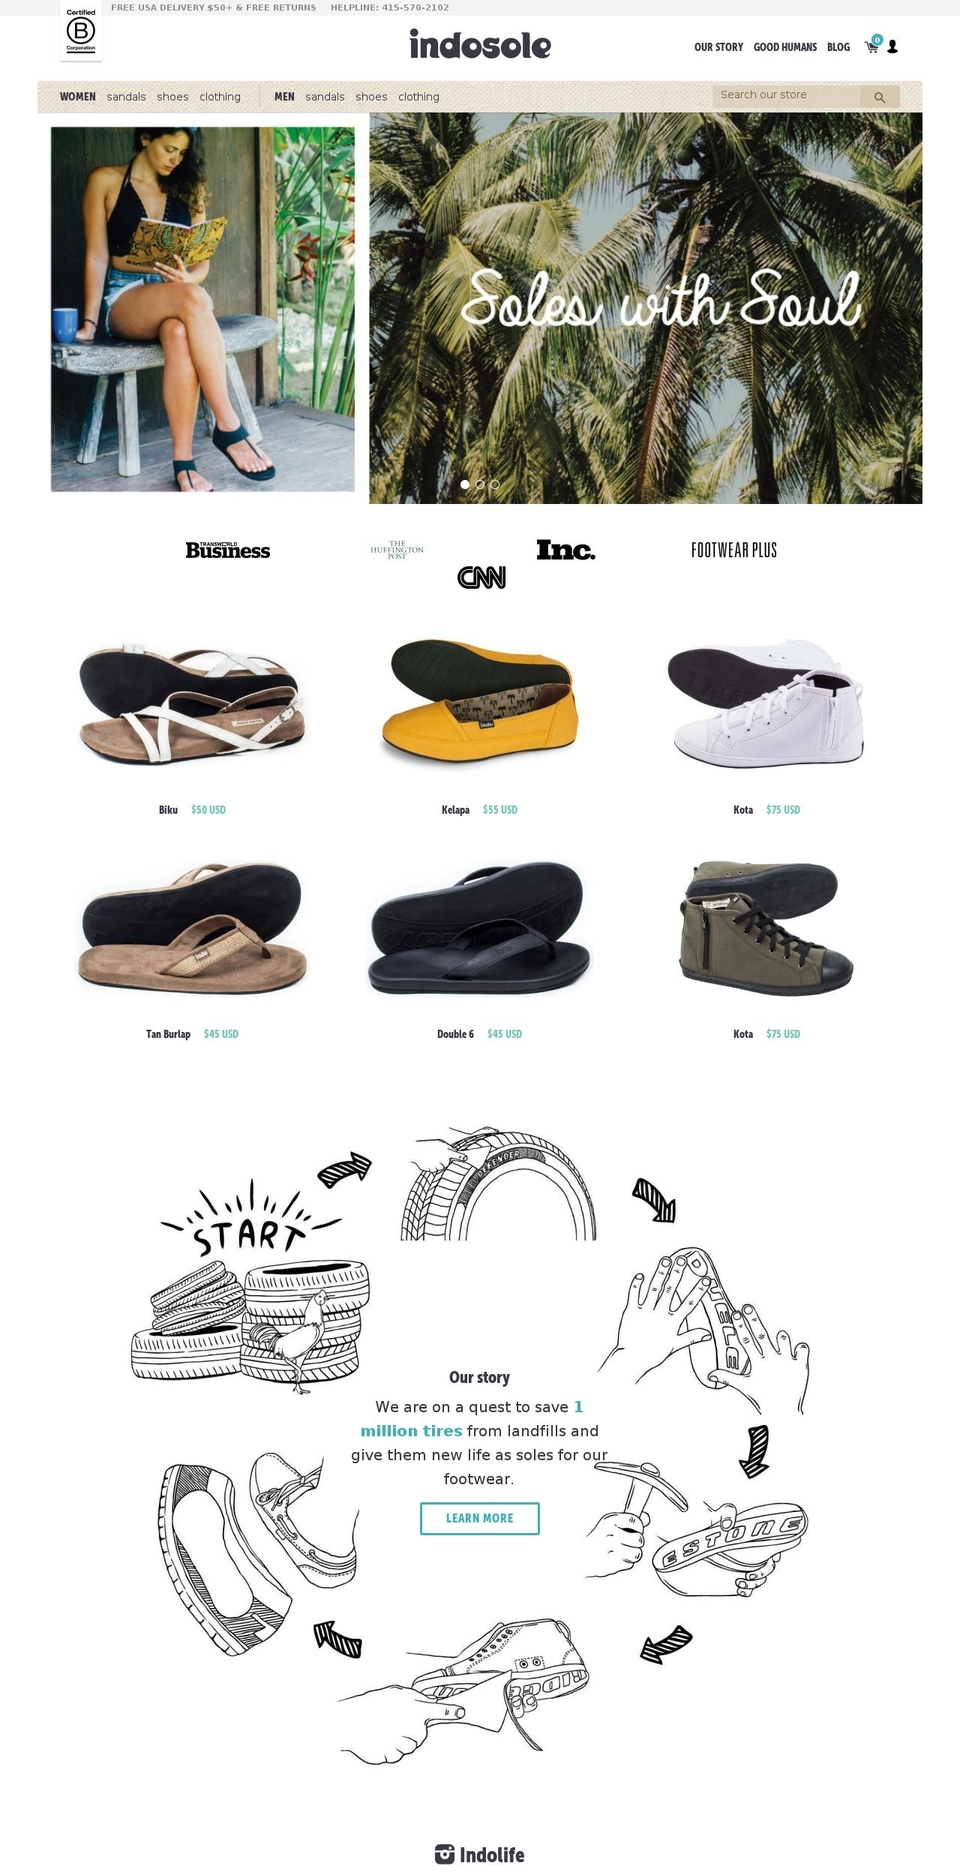 Focal Shopify theme site example indosole.com